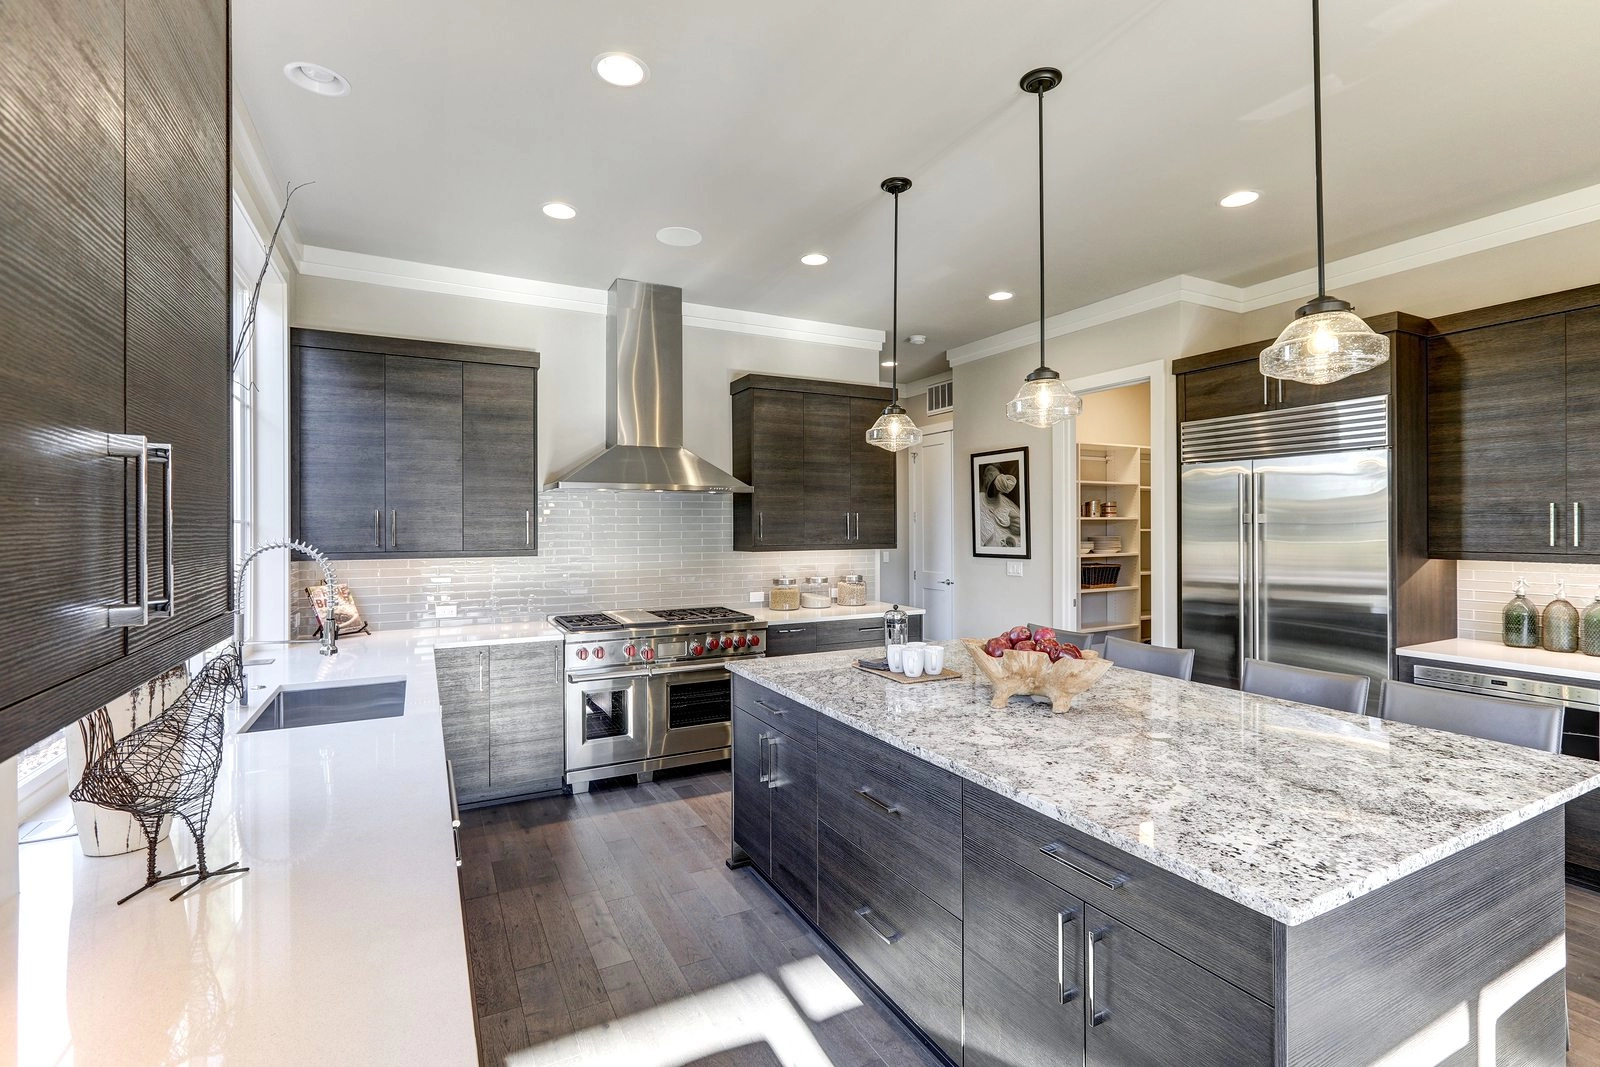 Choosing the Right Countertop Material for Your Kitchen